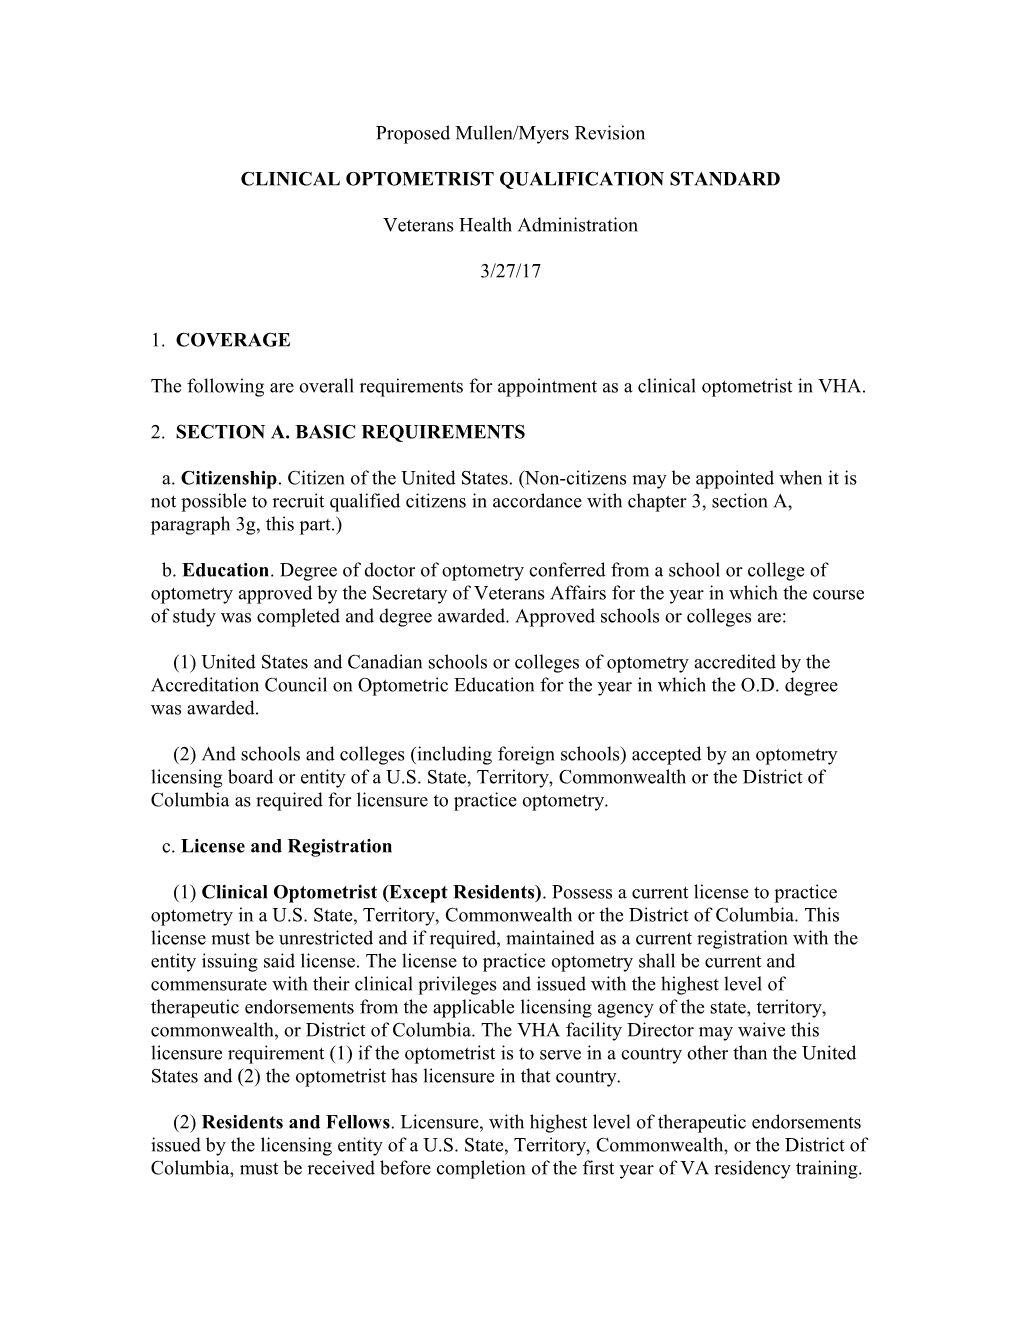 Clinical Optometrist Qualification Standard